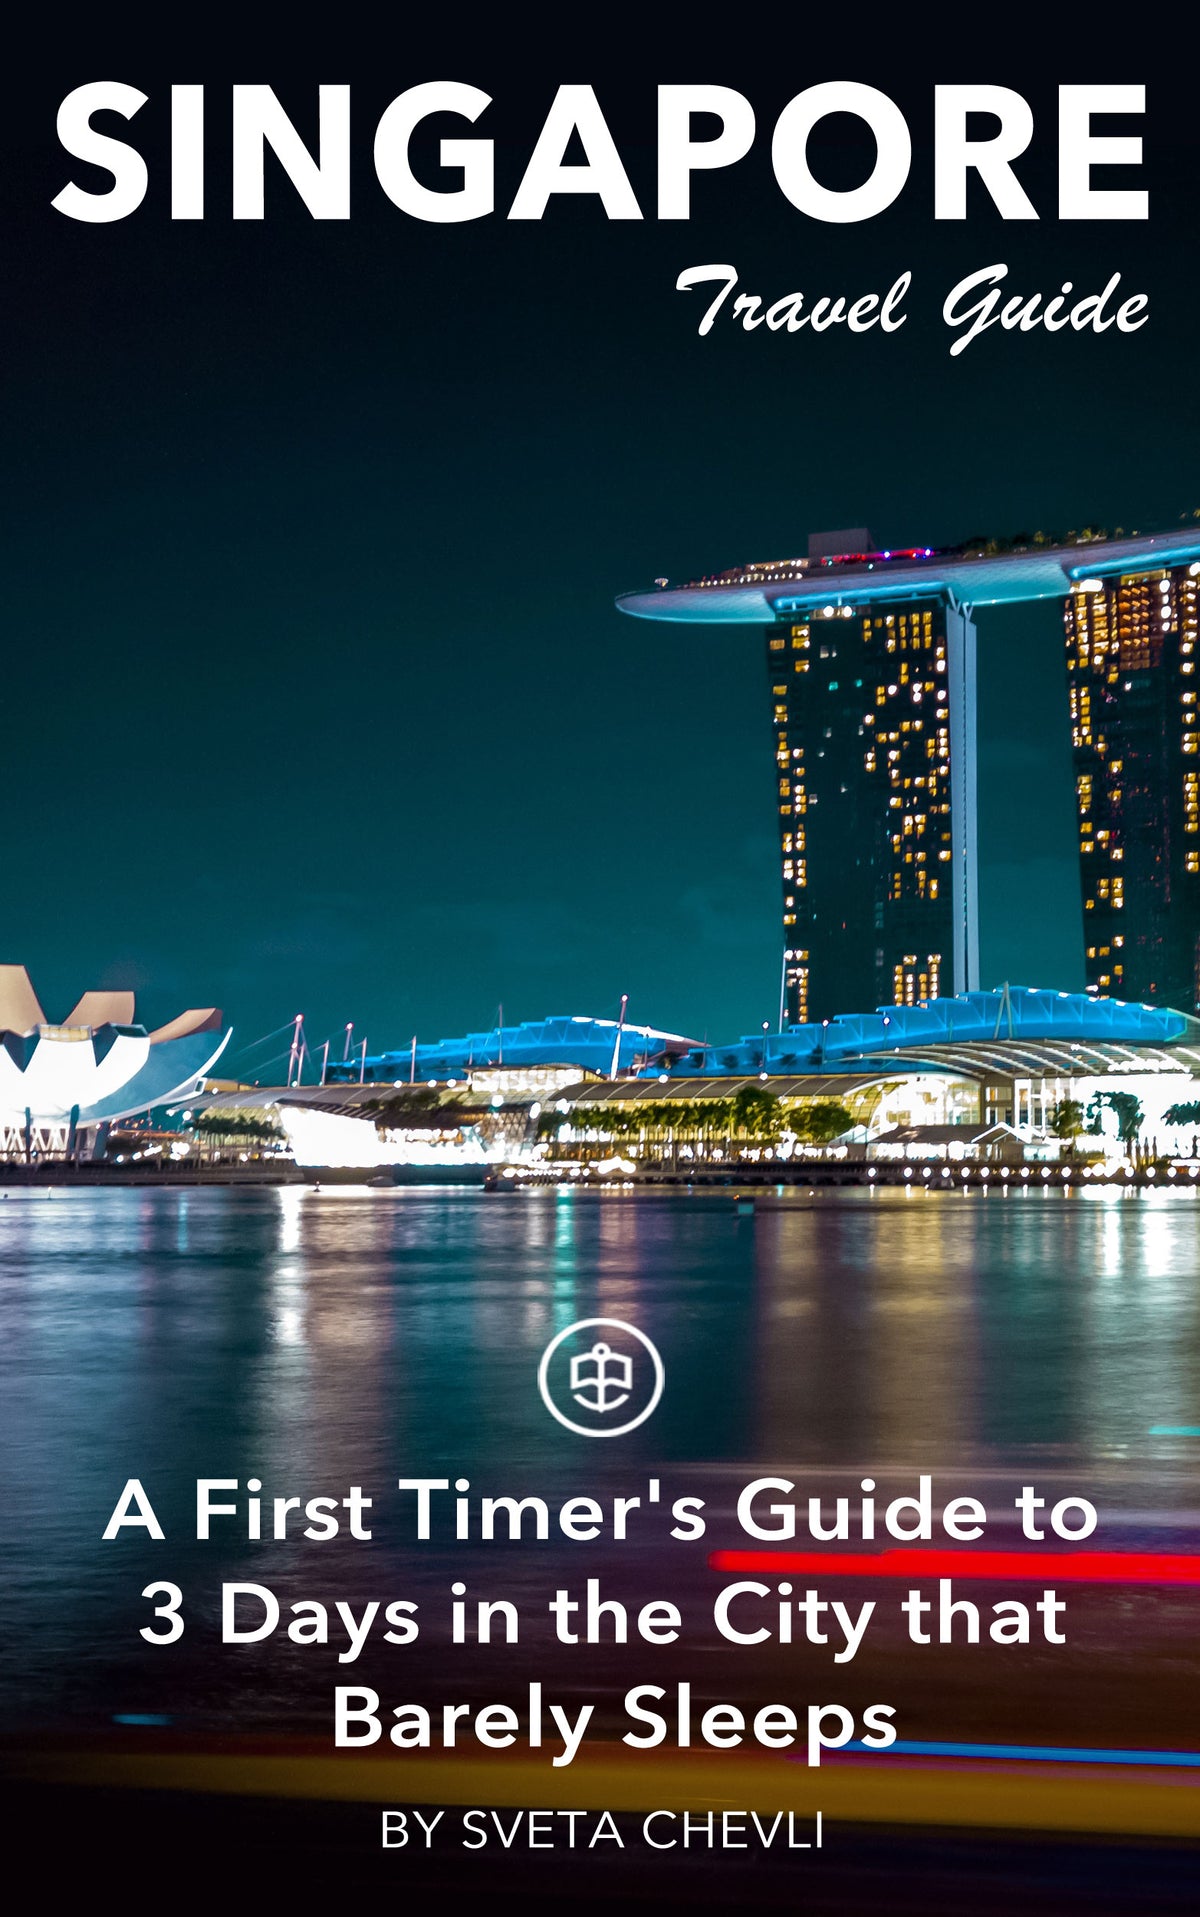 A First Timer's Guide to 3 Days in the City that Barely Sleeps - Singapore